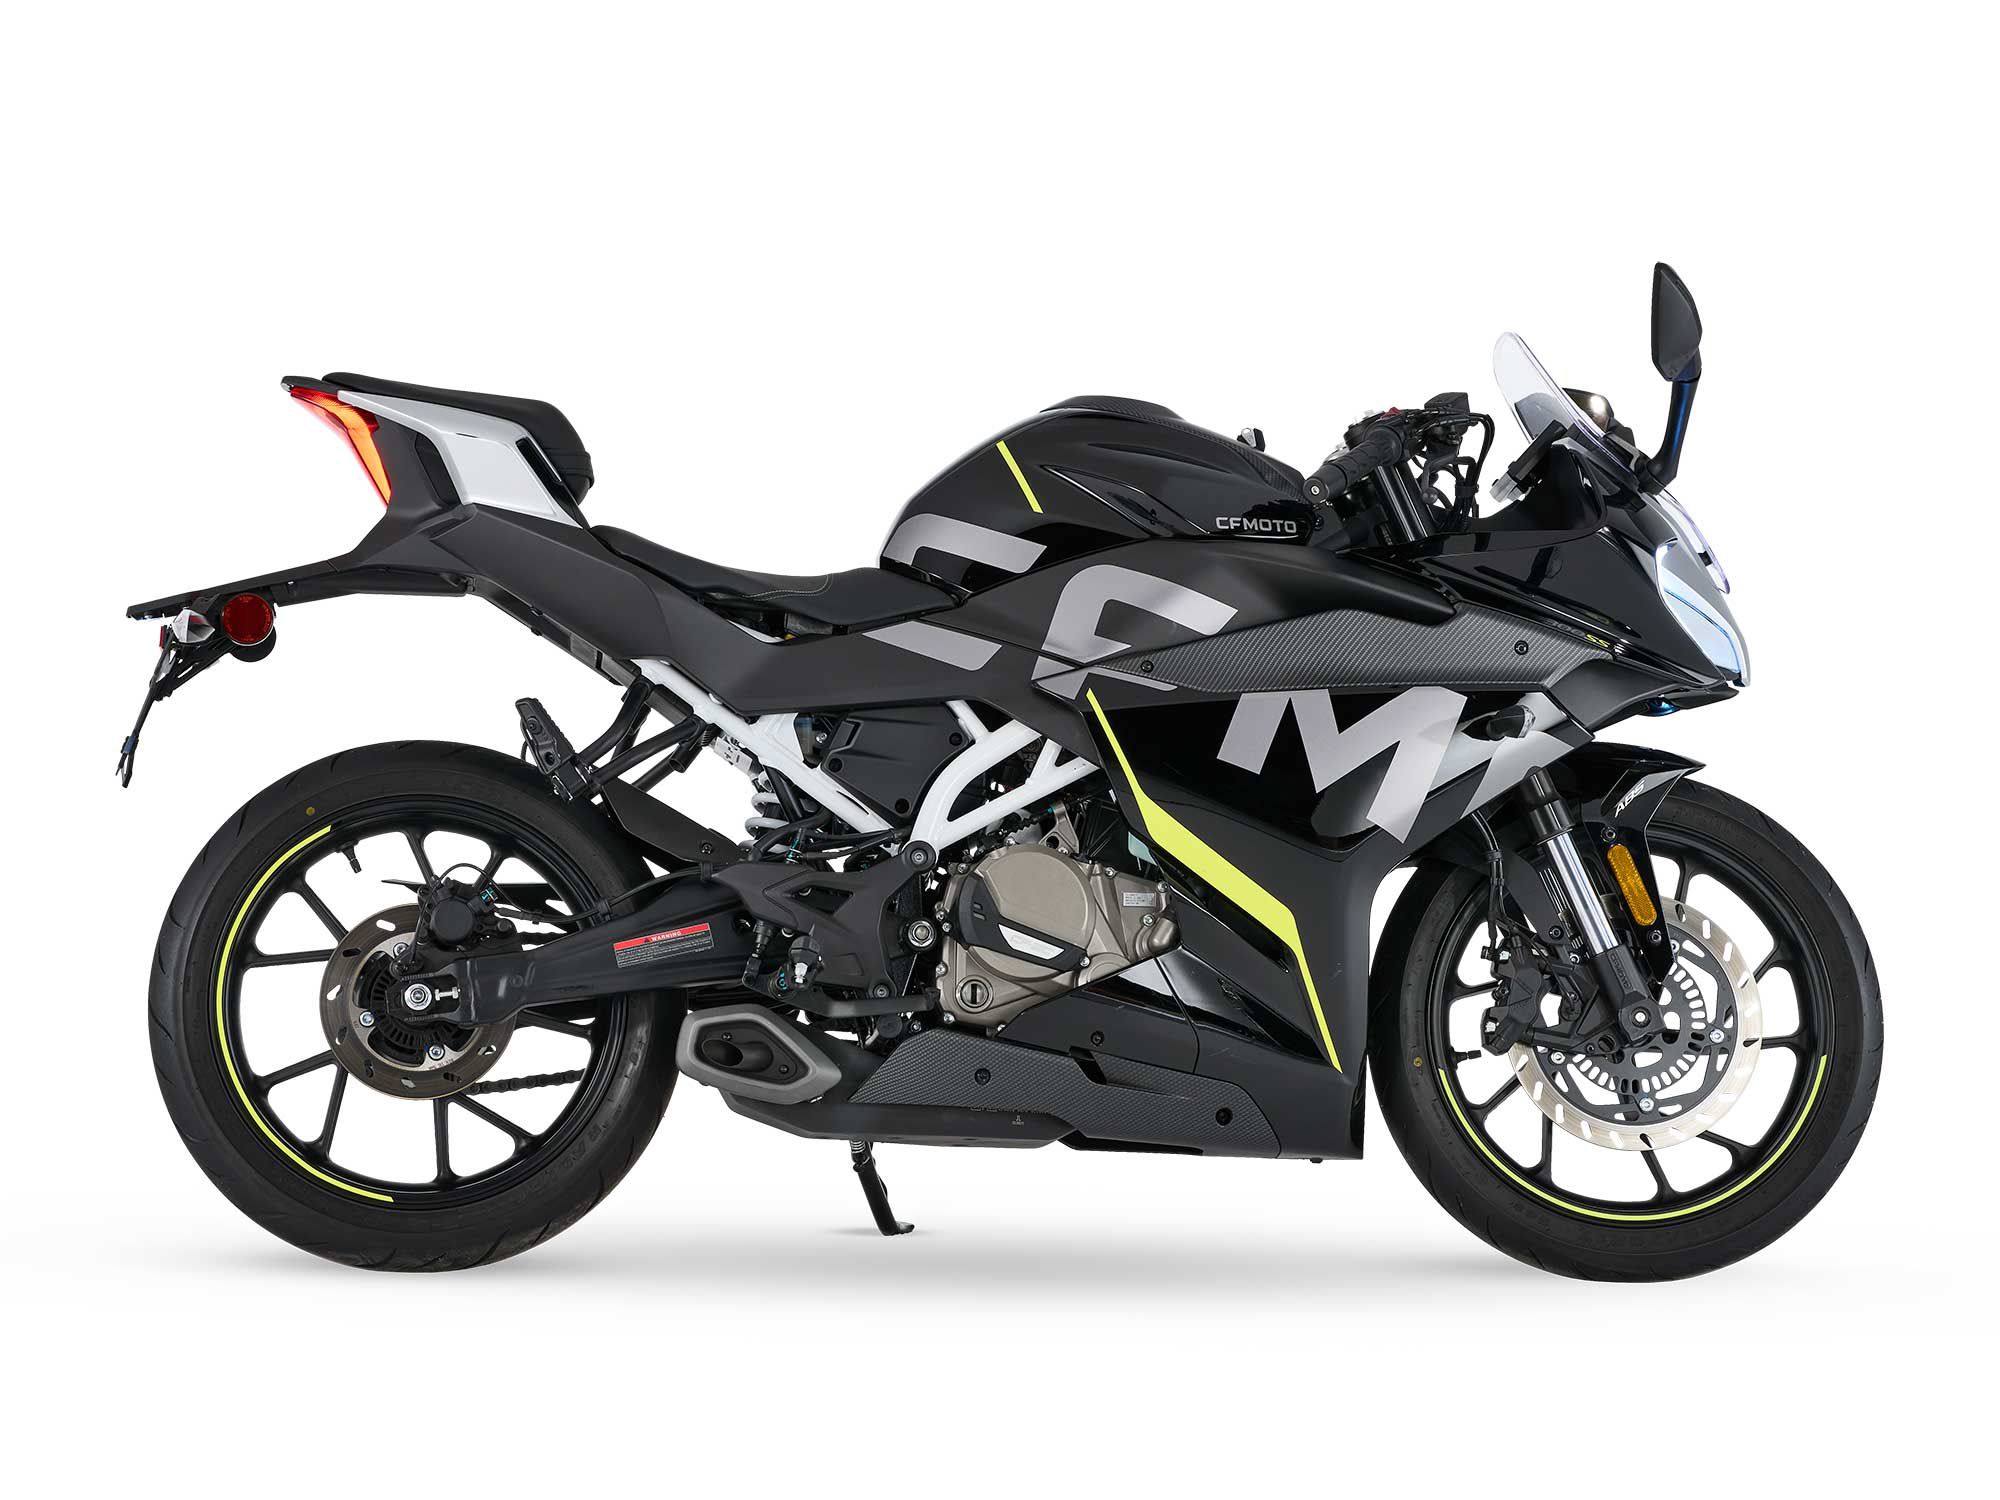 The 300SS is CFMoto’s sportier entry into the small-displacement sportbike category.